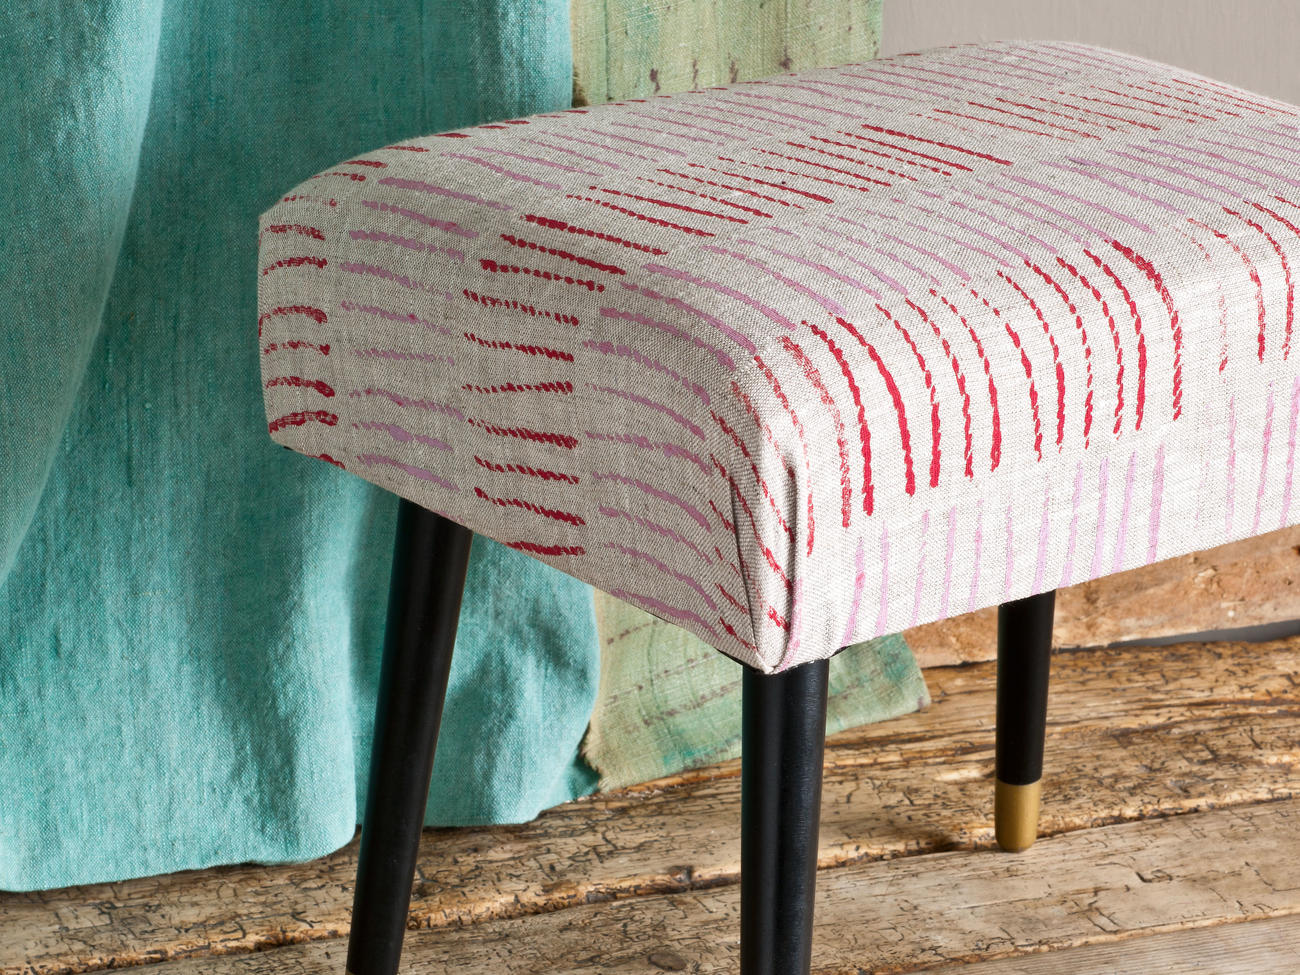 DIY Your Own Hand-Printed Footstool